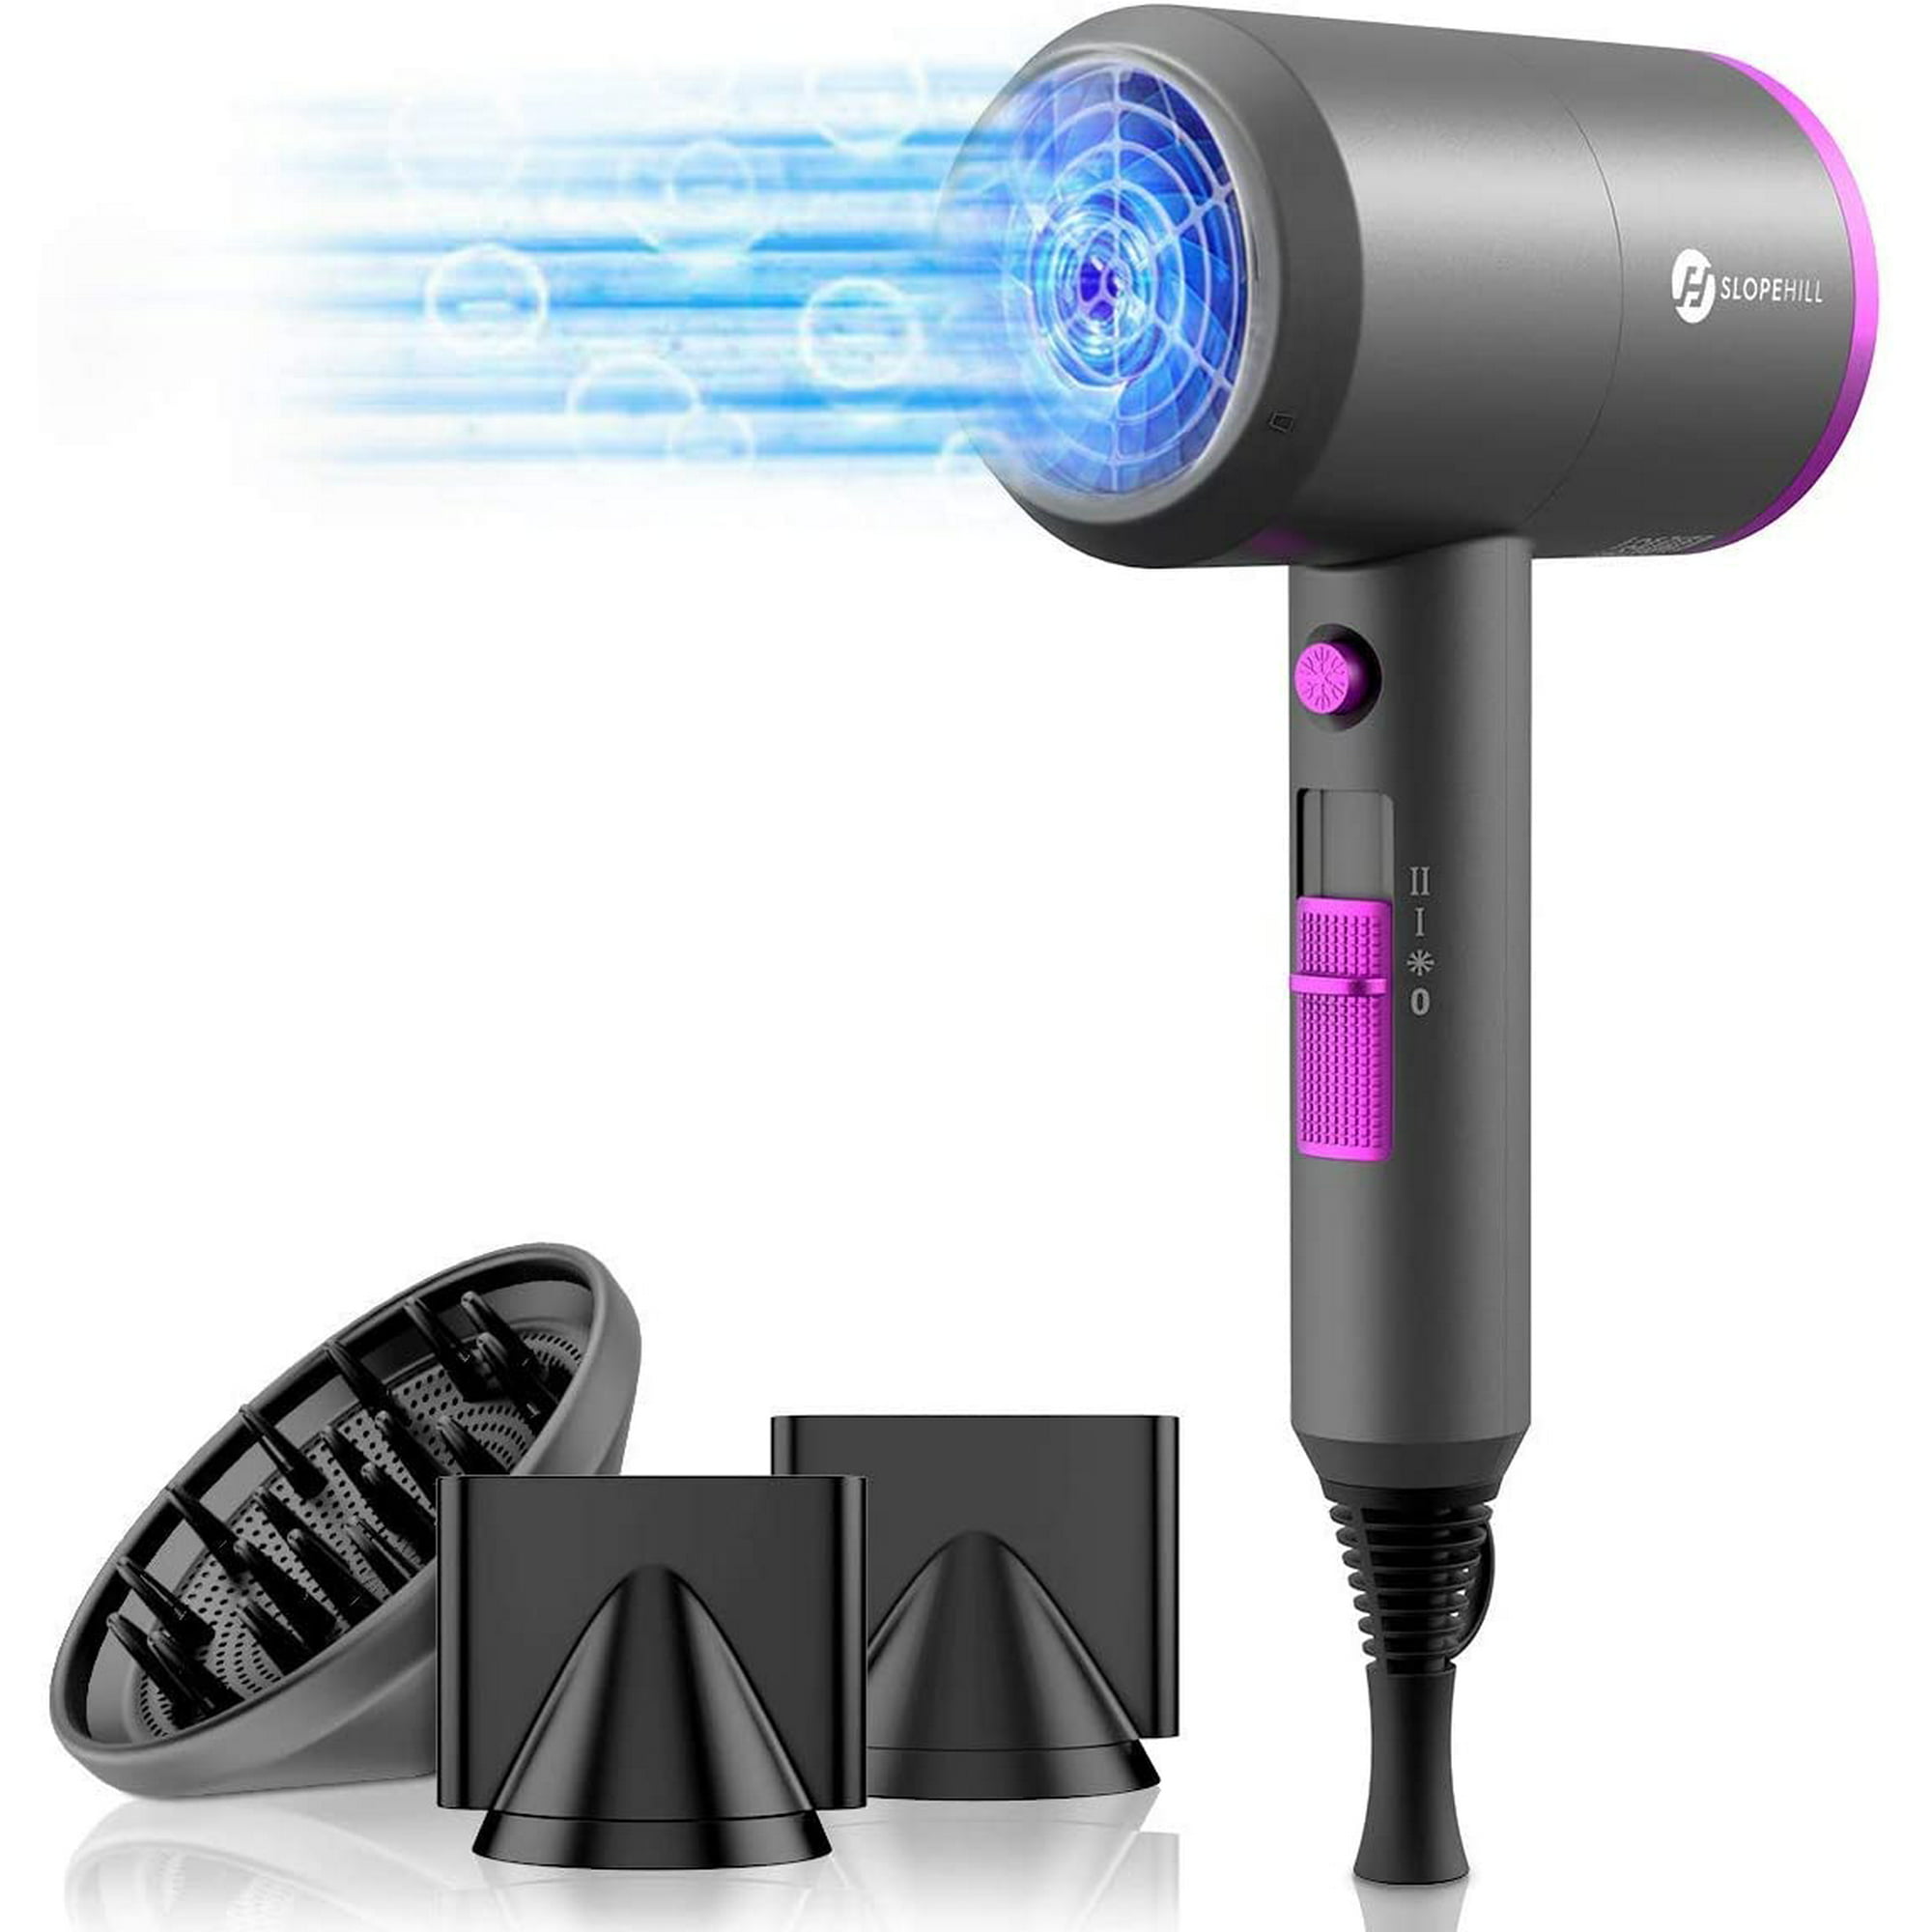 Professional Ionic Salon Hair Dryer, Powerful 1800W Fast Dry Low Noise Blow  Dryer with 2 Concentrator Nozzle 1 Diffuser Attachments for Home Salon  Travel | Walmart Canada